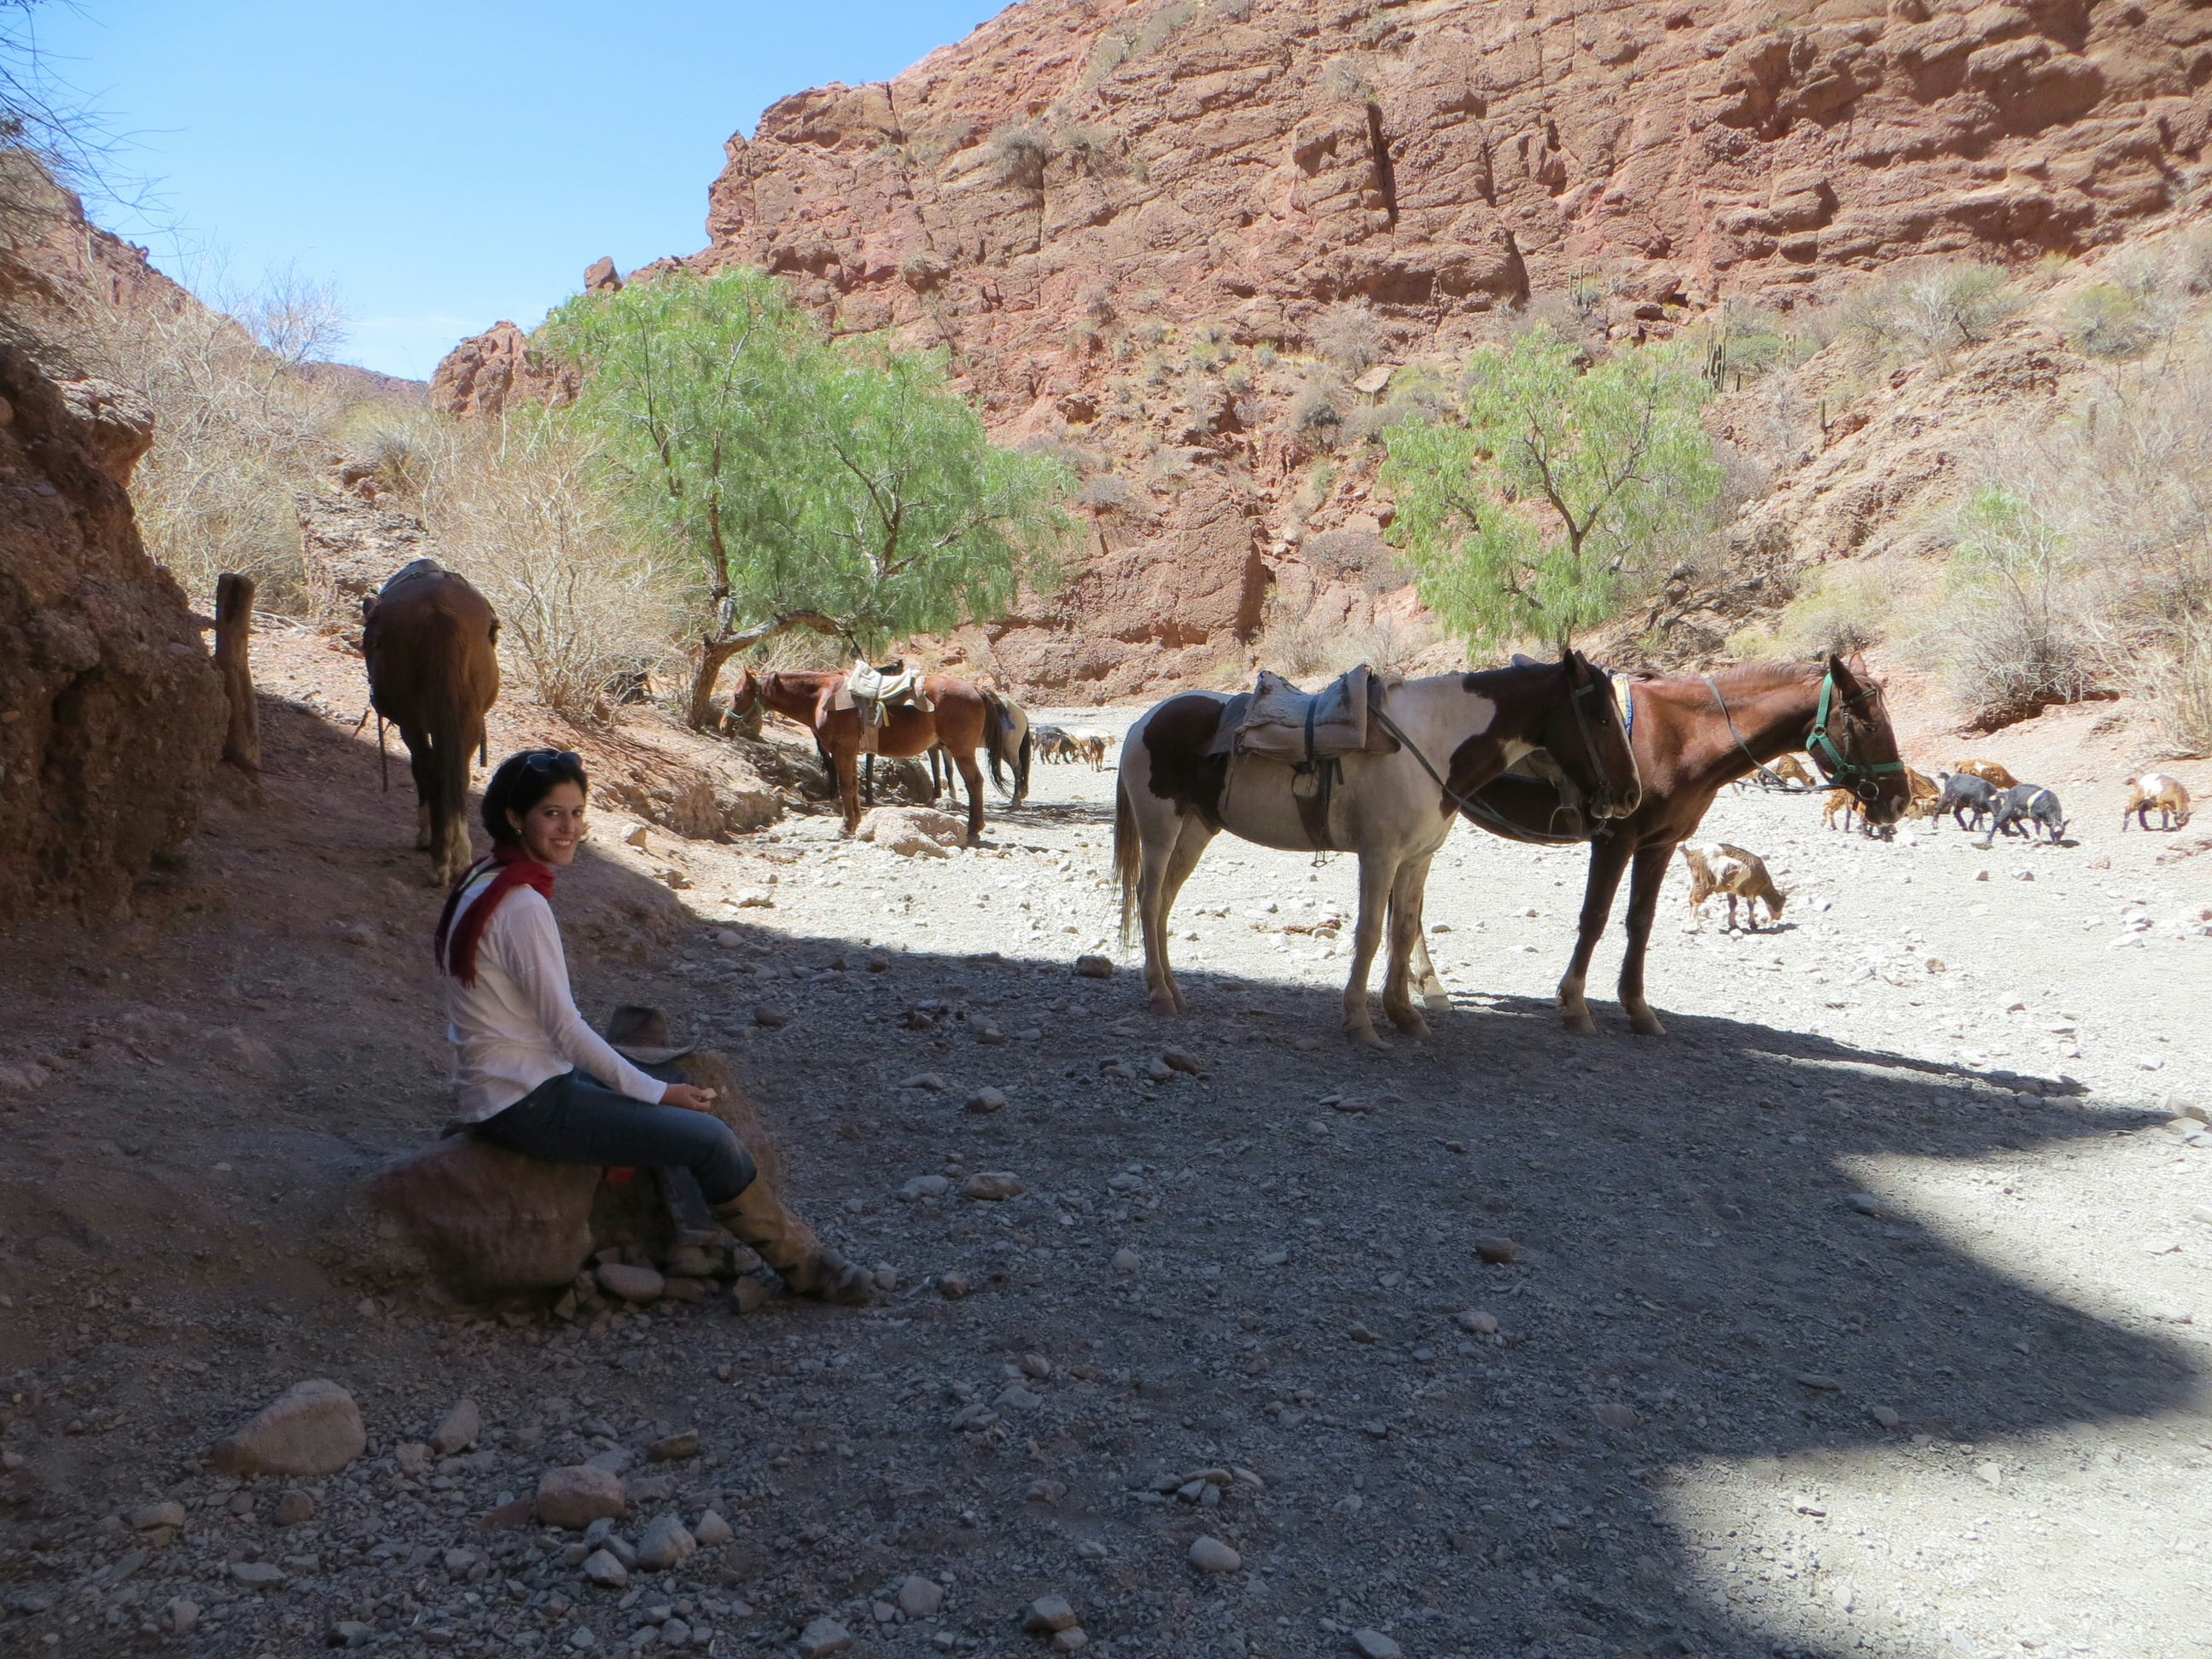 A woman sits on a rock while a few saddled horses stand in a rocky, dry riverbed; red rock cliffs surround the scene.